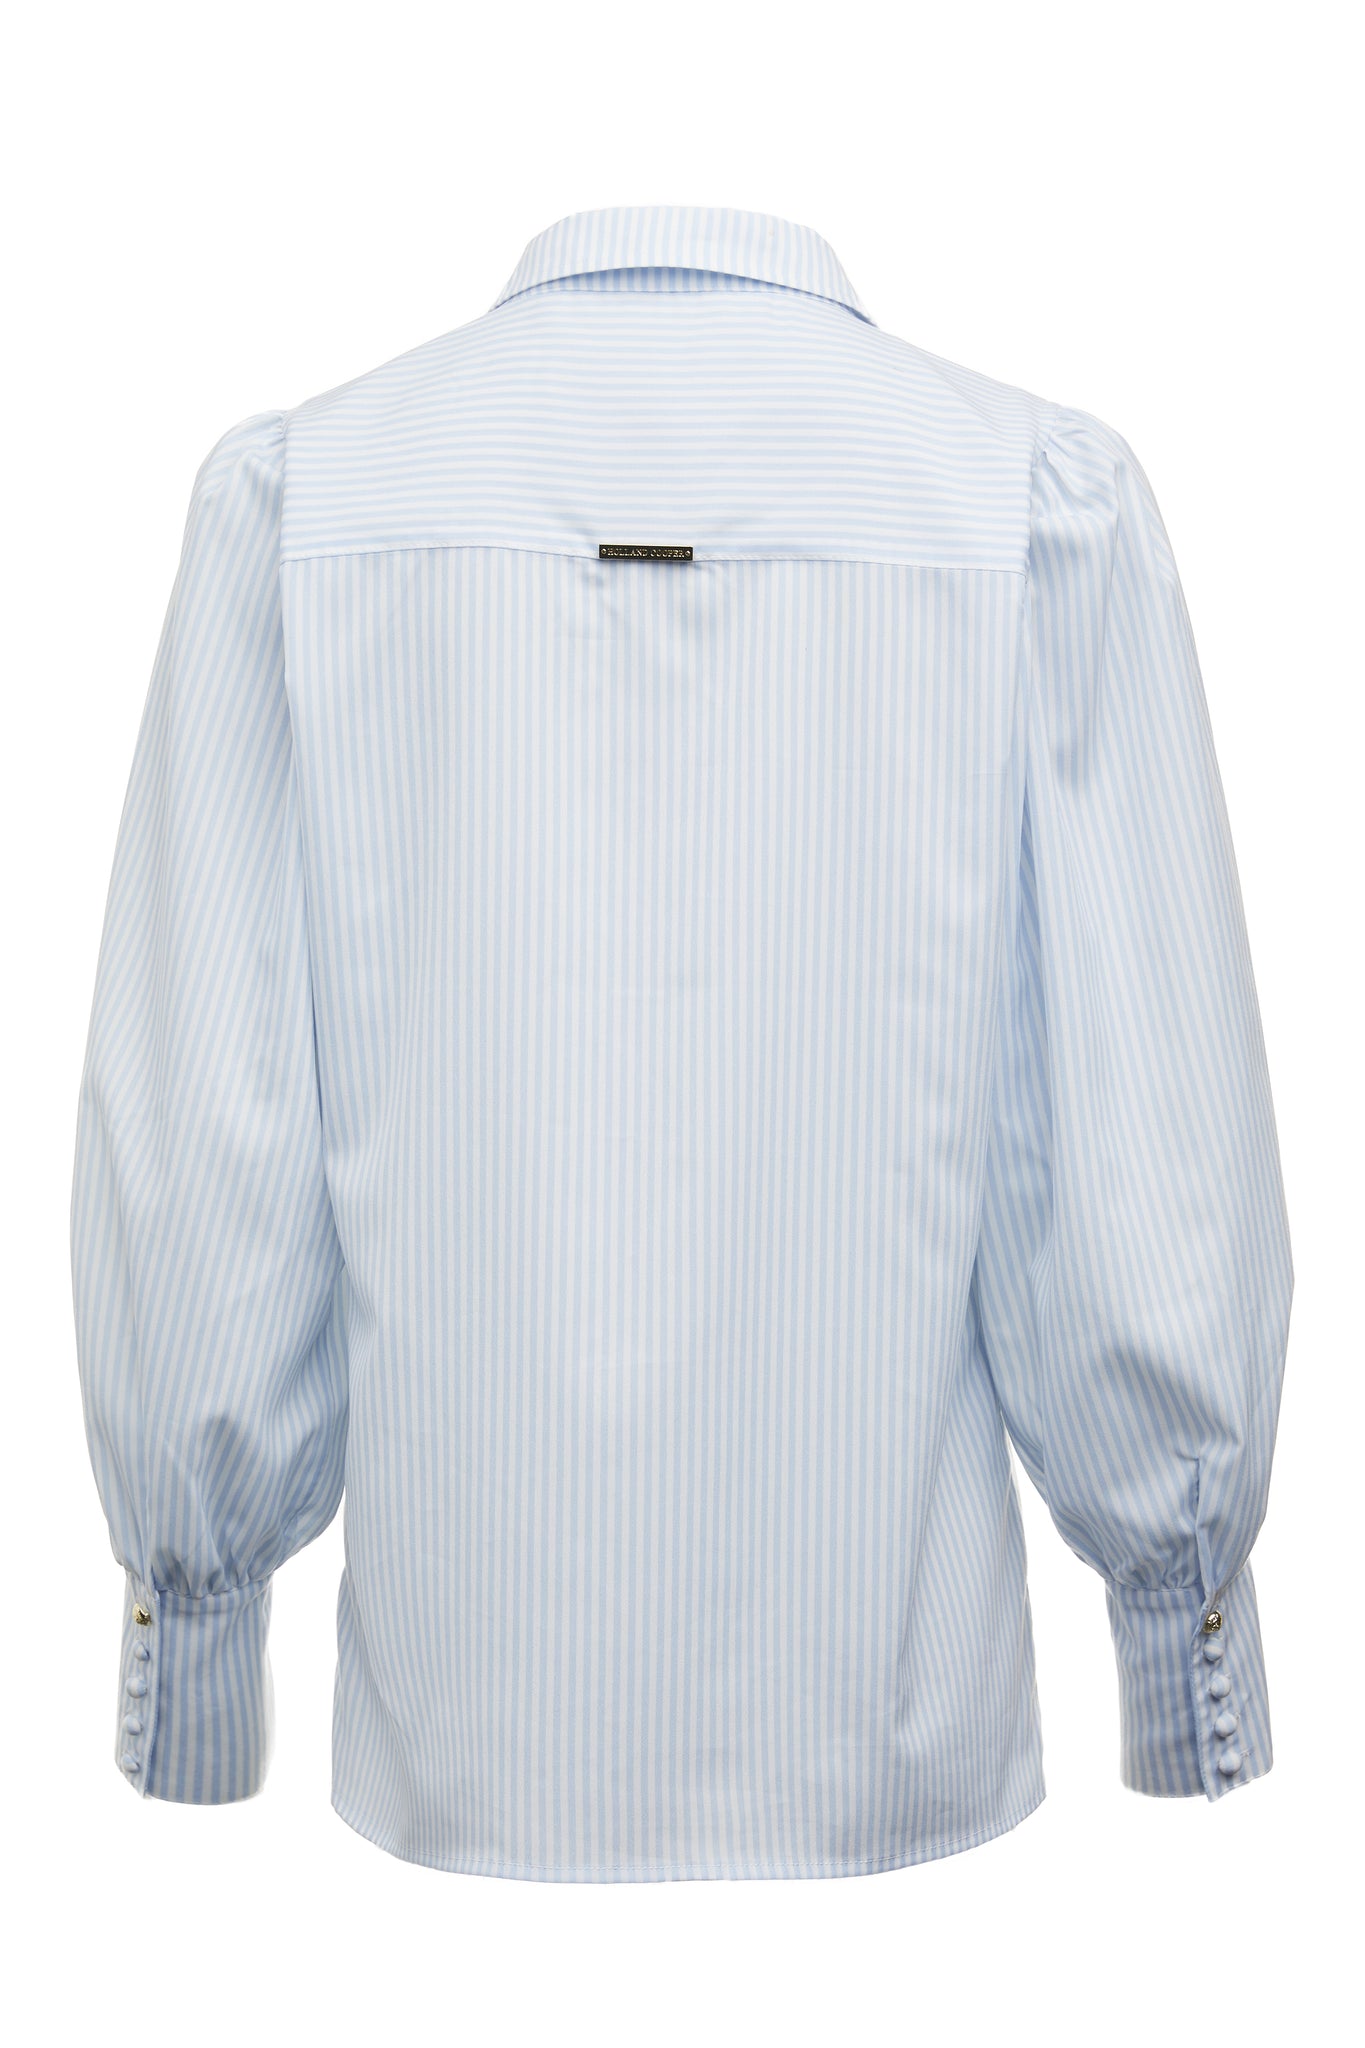 back image of  classic fitted shirt with long sleeves and subtle puffy shoulders with thin blue and white stipe print design with extra long cuffs and rounded collar detailed with fabric buttons 